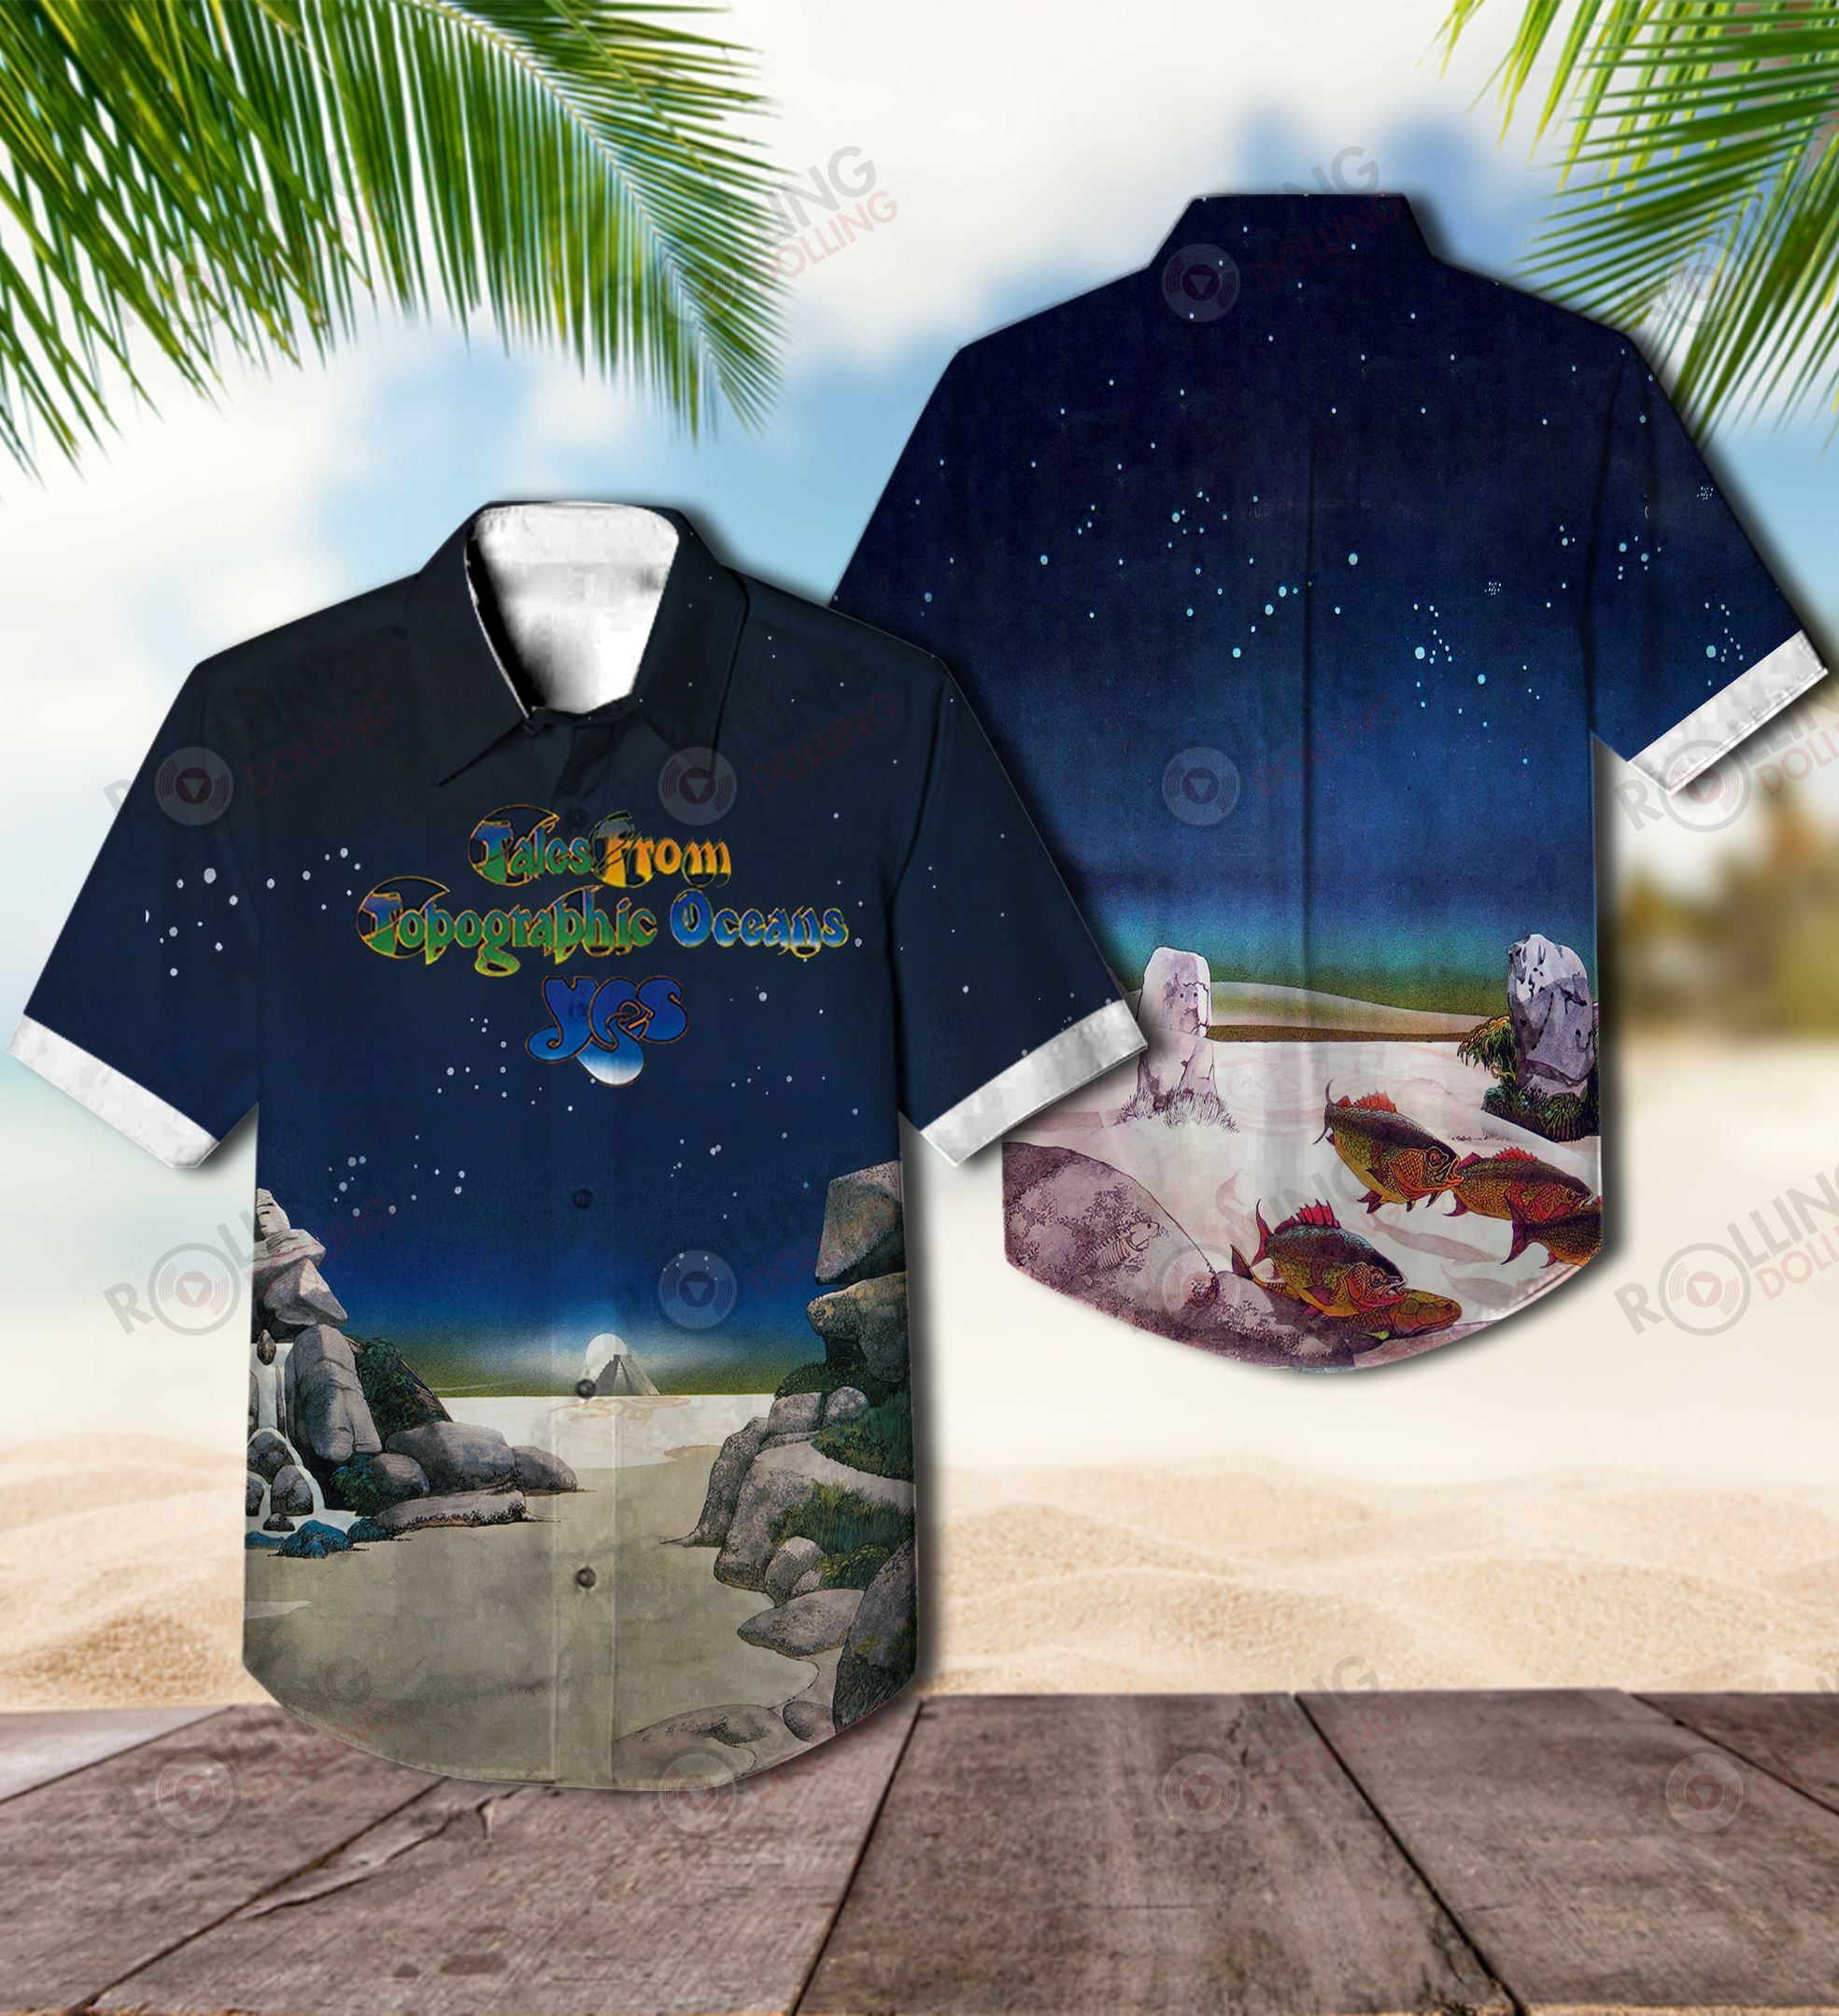 This would make a great gift for any fan who loves Hawaiian Shirt as well as Rock band 40